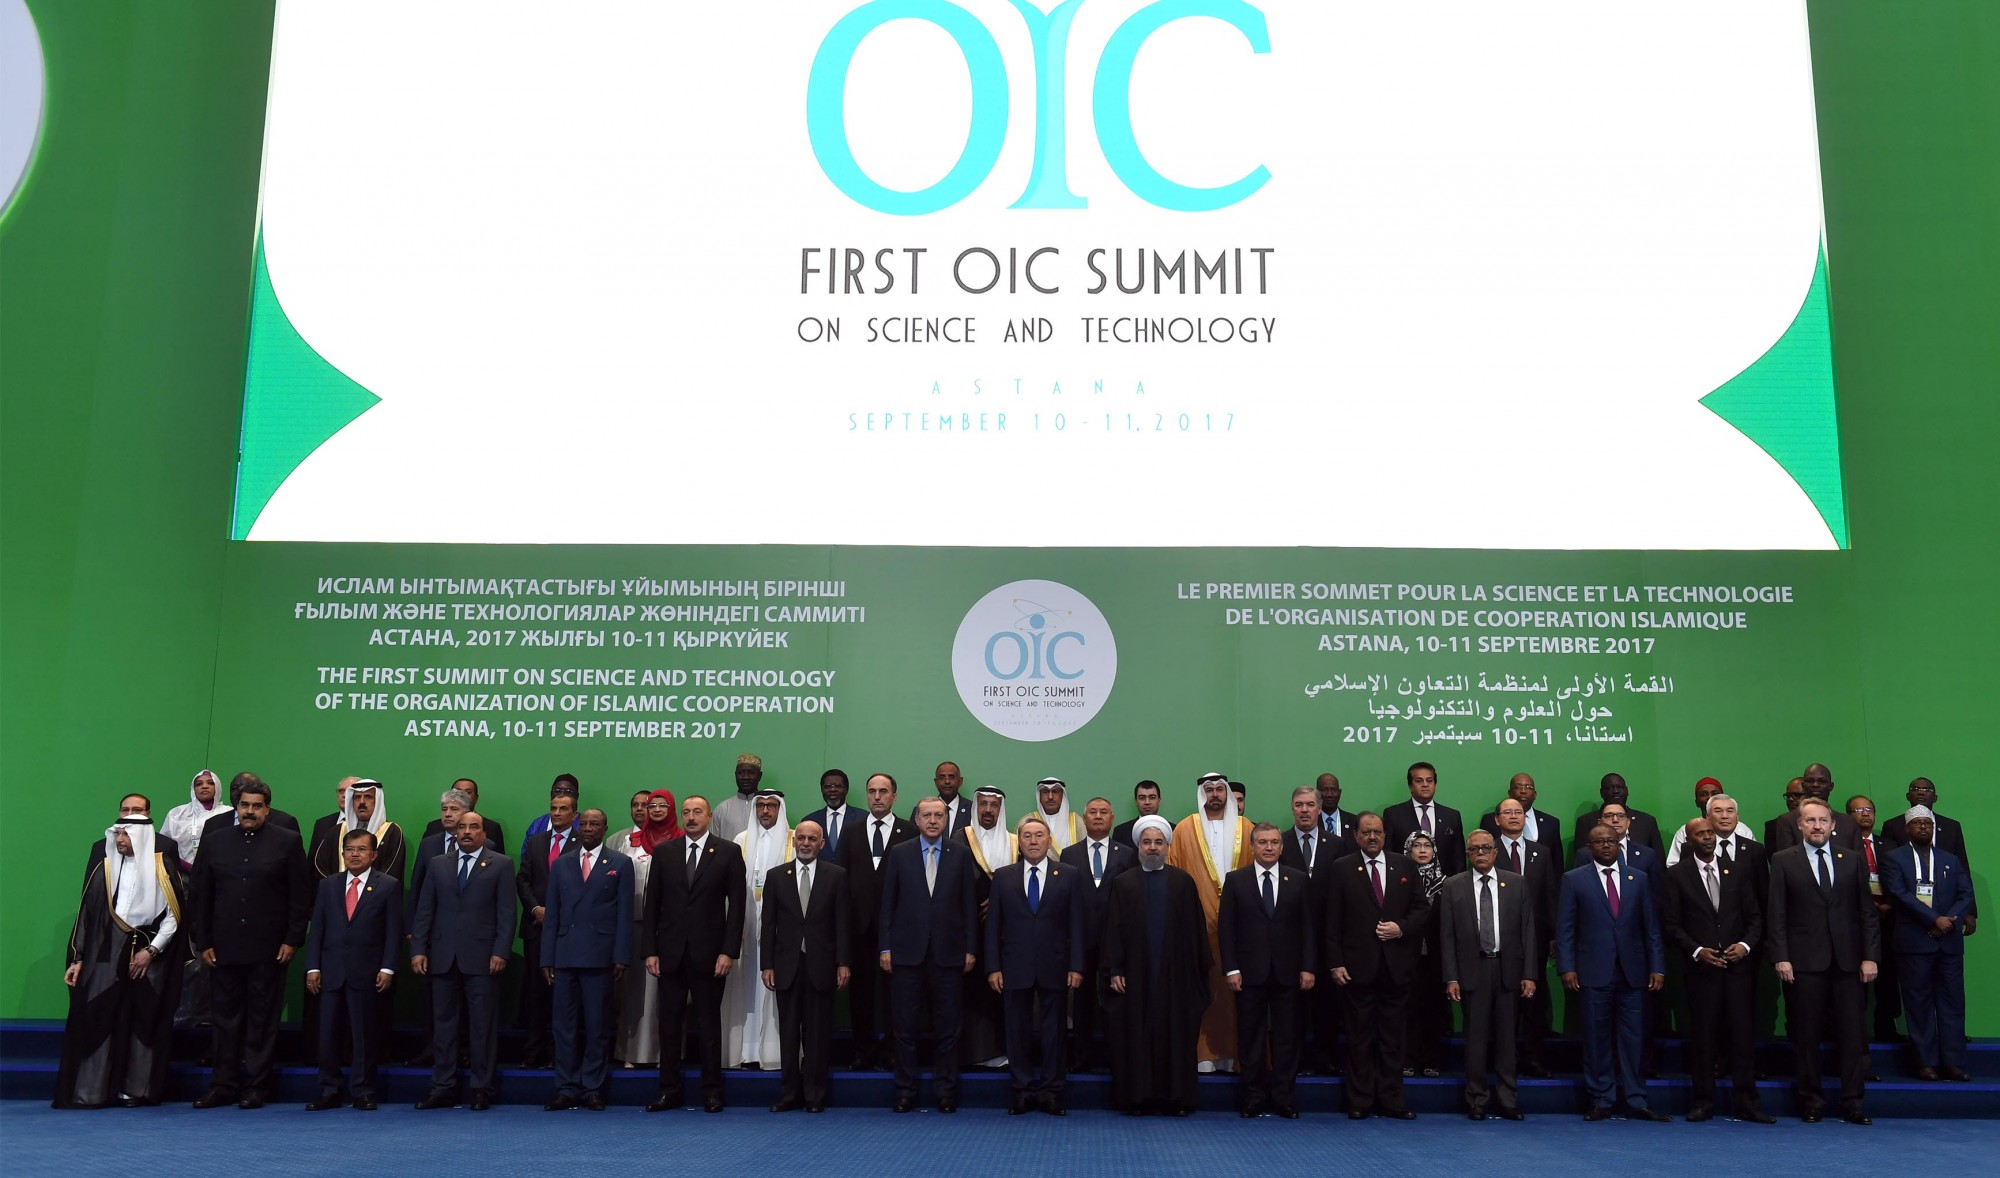 First OIC Summit on Science and Technology started in Astana